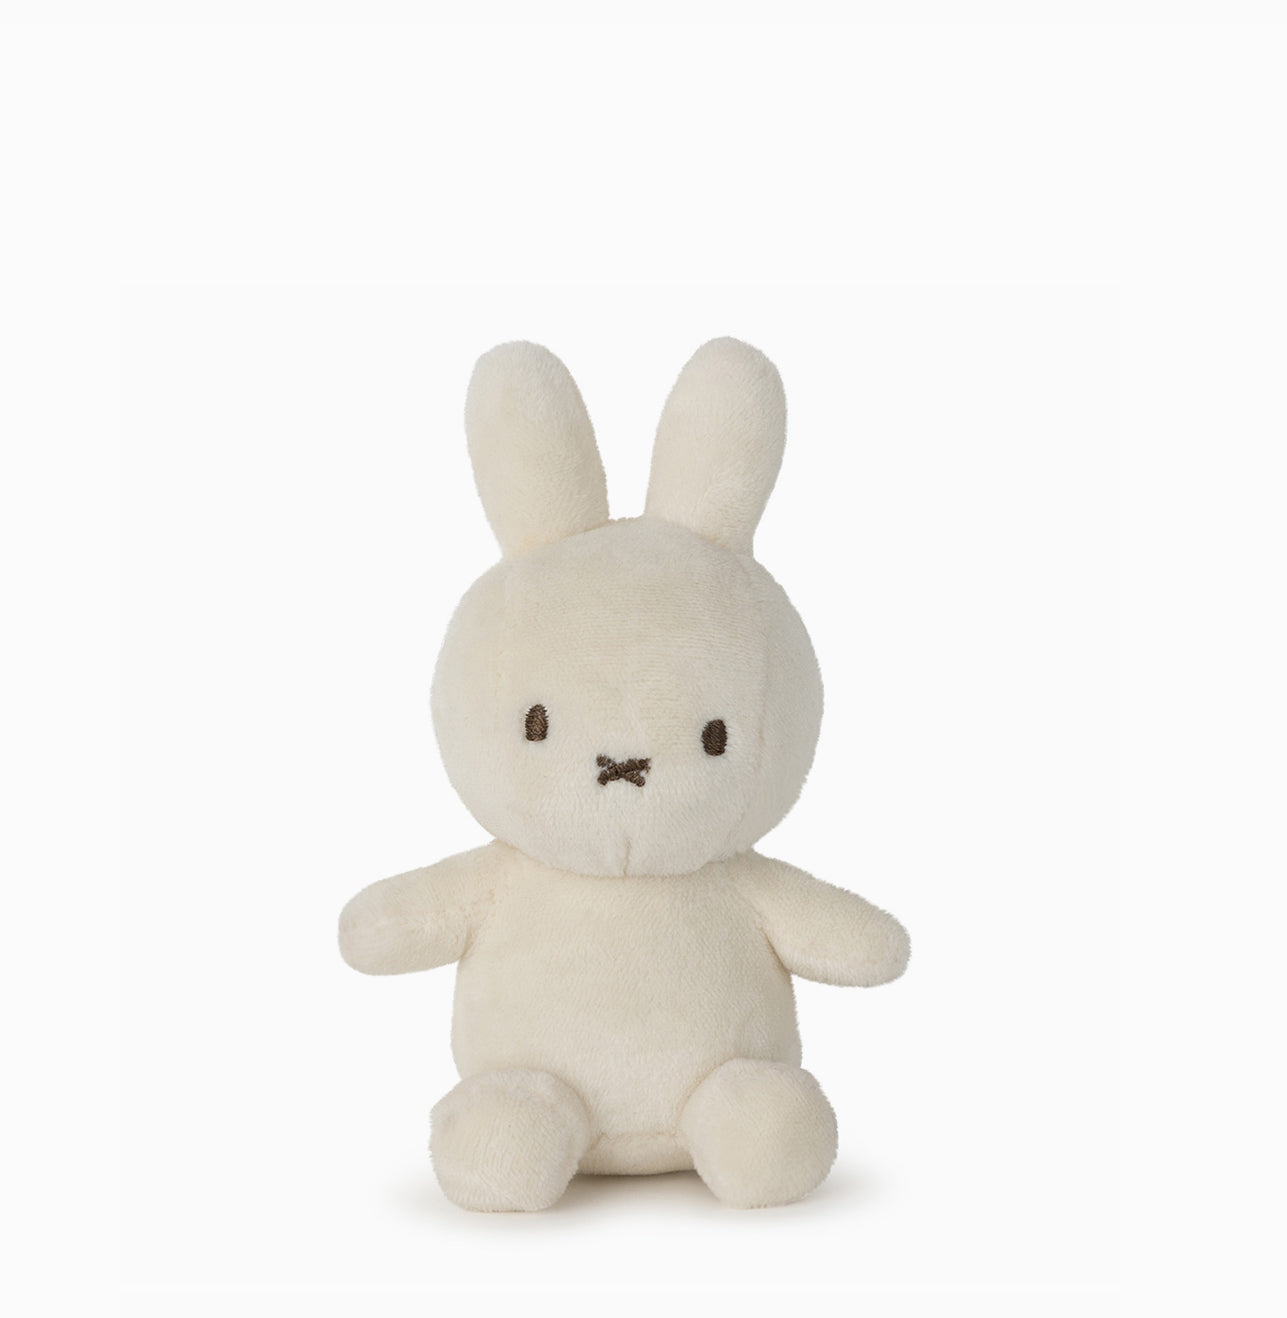 Miffy Lucky Charm Soft Cream 10cm Soft Toy in a Gift Box